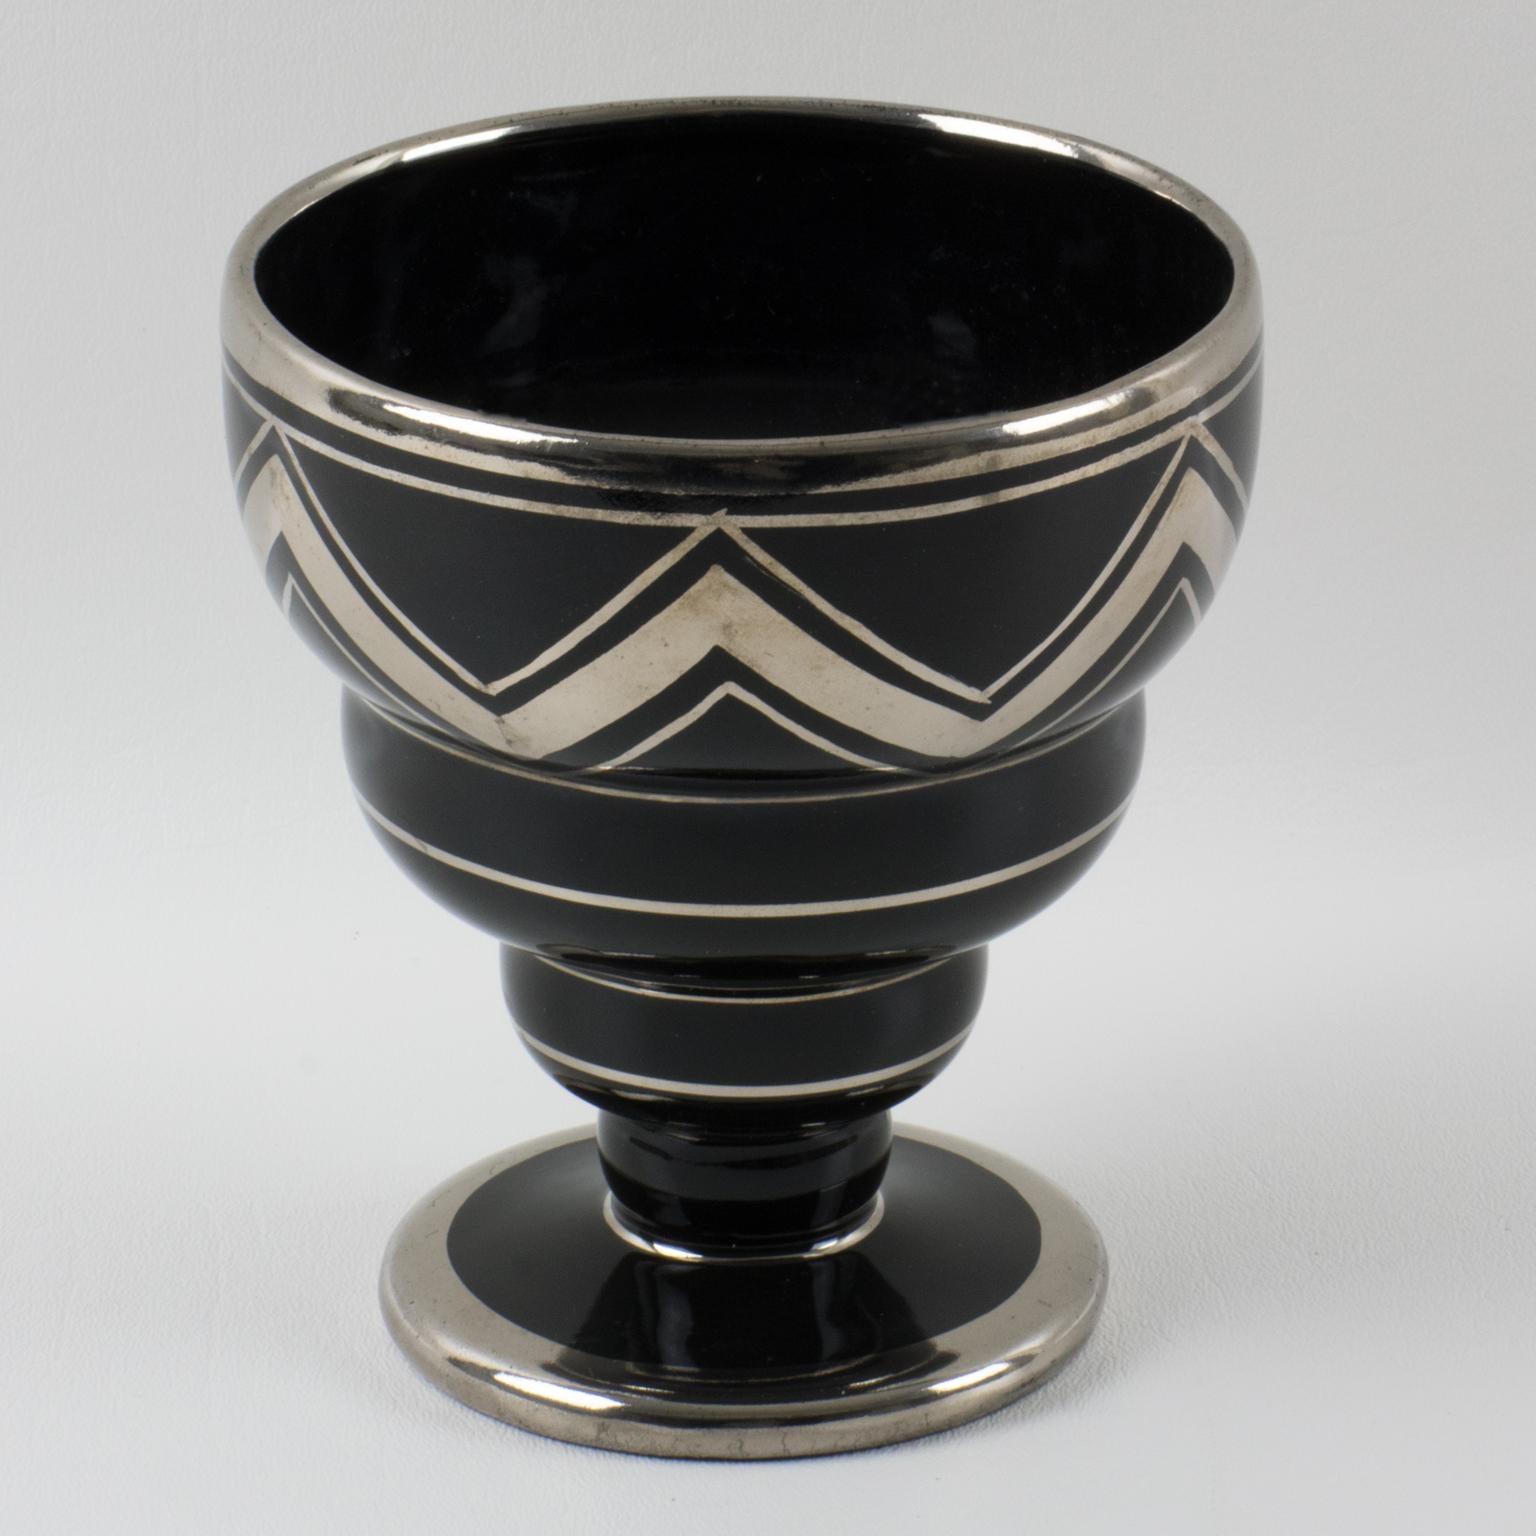 French Art Deco Silver Overlay and Black Ceramic Vase by Ceram France, 1930s For Sale